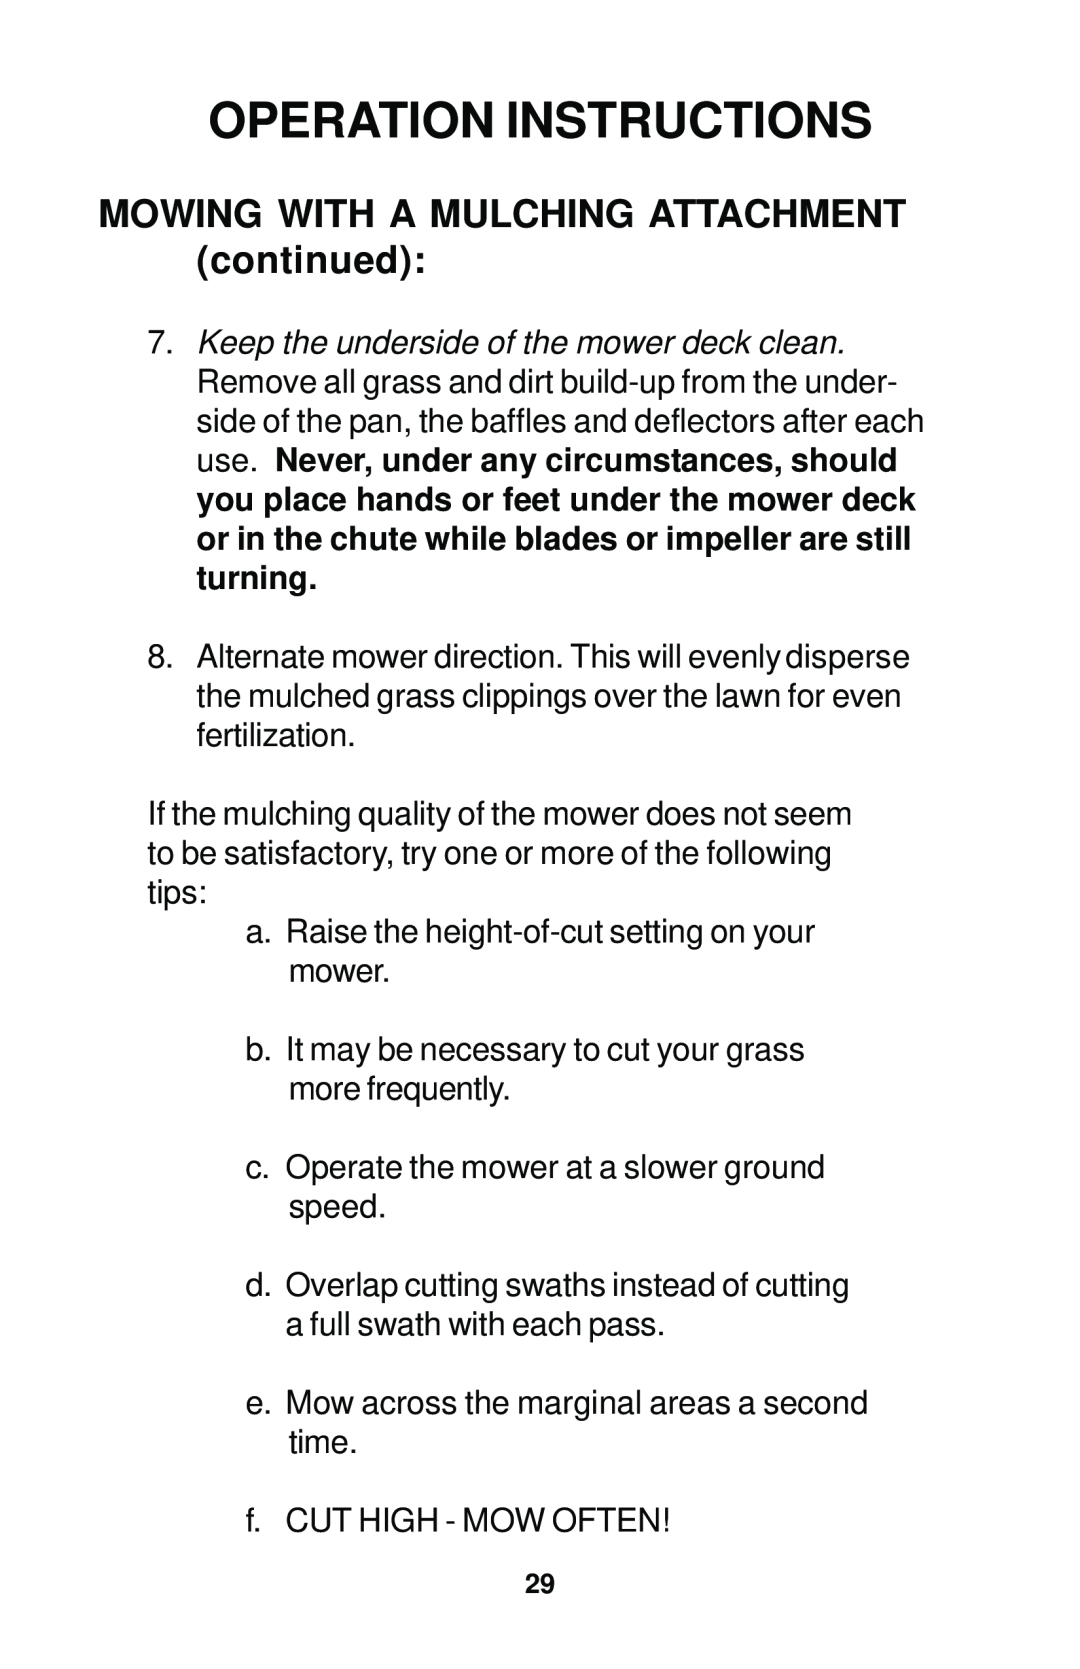 Dixon 12881-1104 manual MOWING WITH A MULCHING ATTACHMENT continued, Operation Instructions 